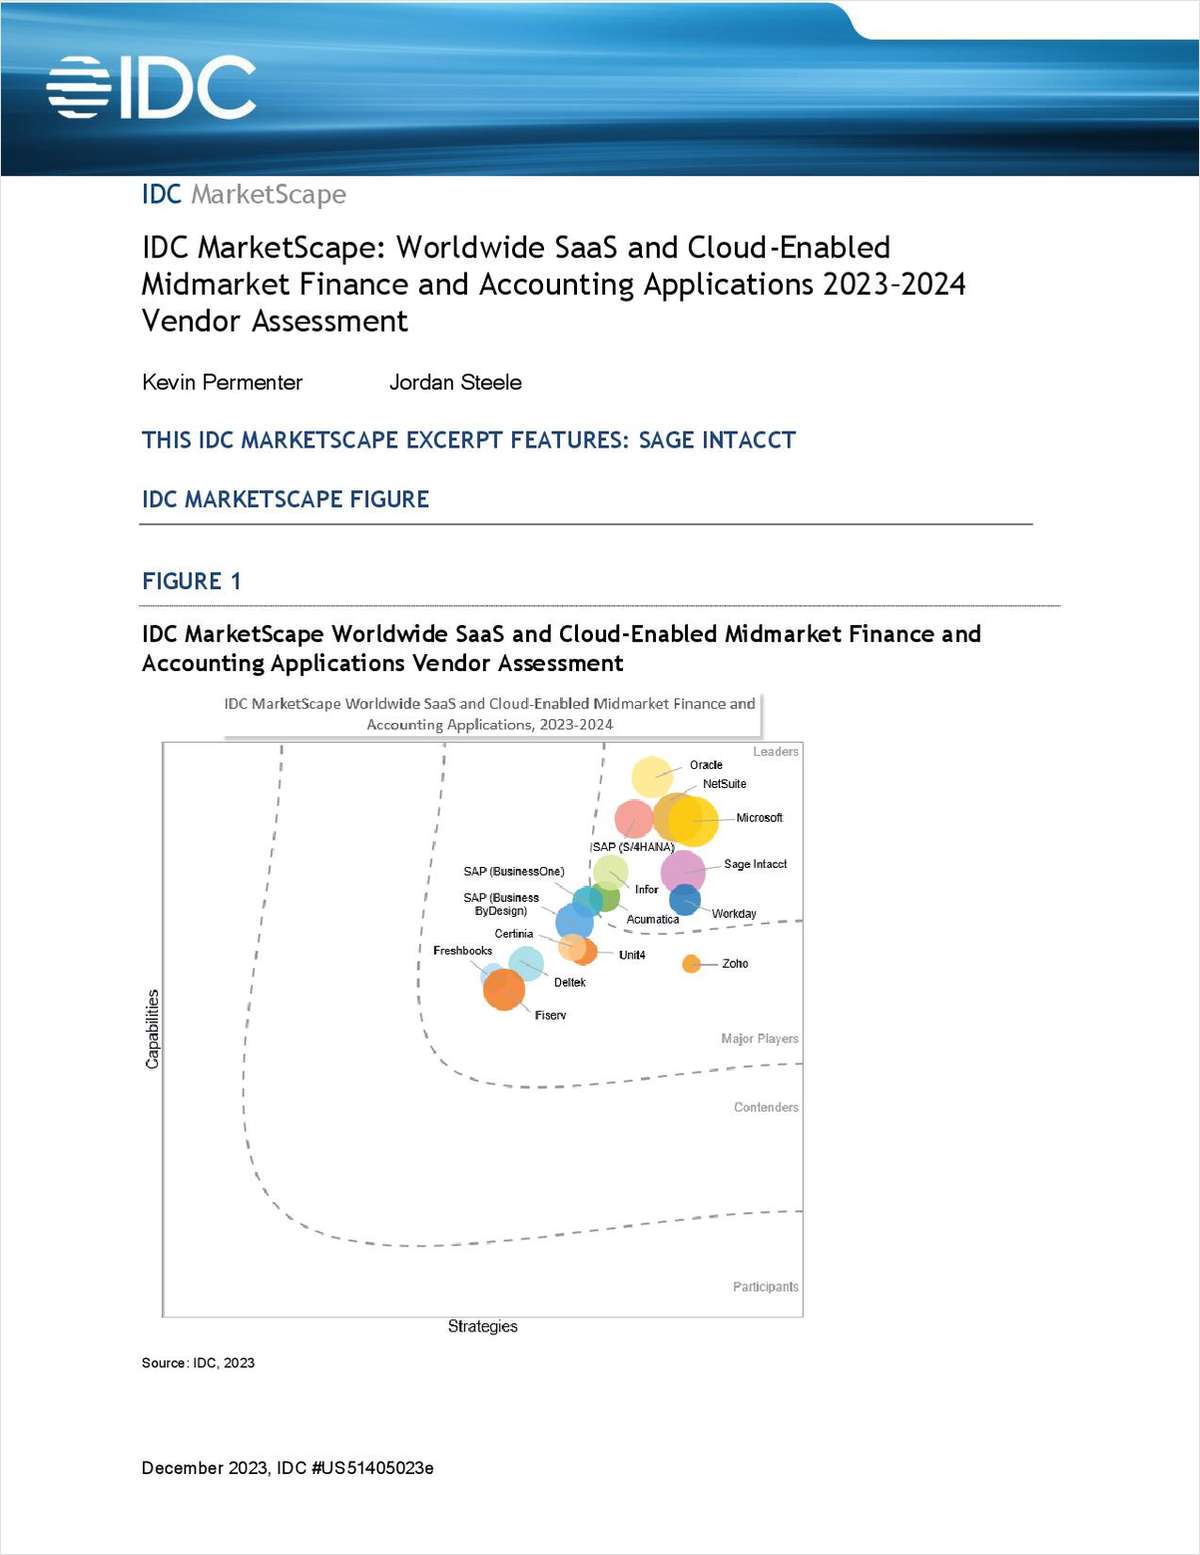 IDC MarketScape: Worldwide SaaS and Cloud-Enabled Midmarket Finance and Accounting Applications 2023-2024 Vendor Assessment